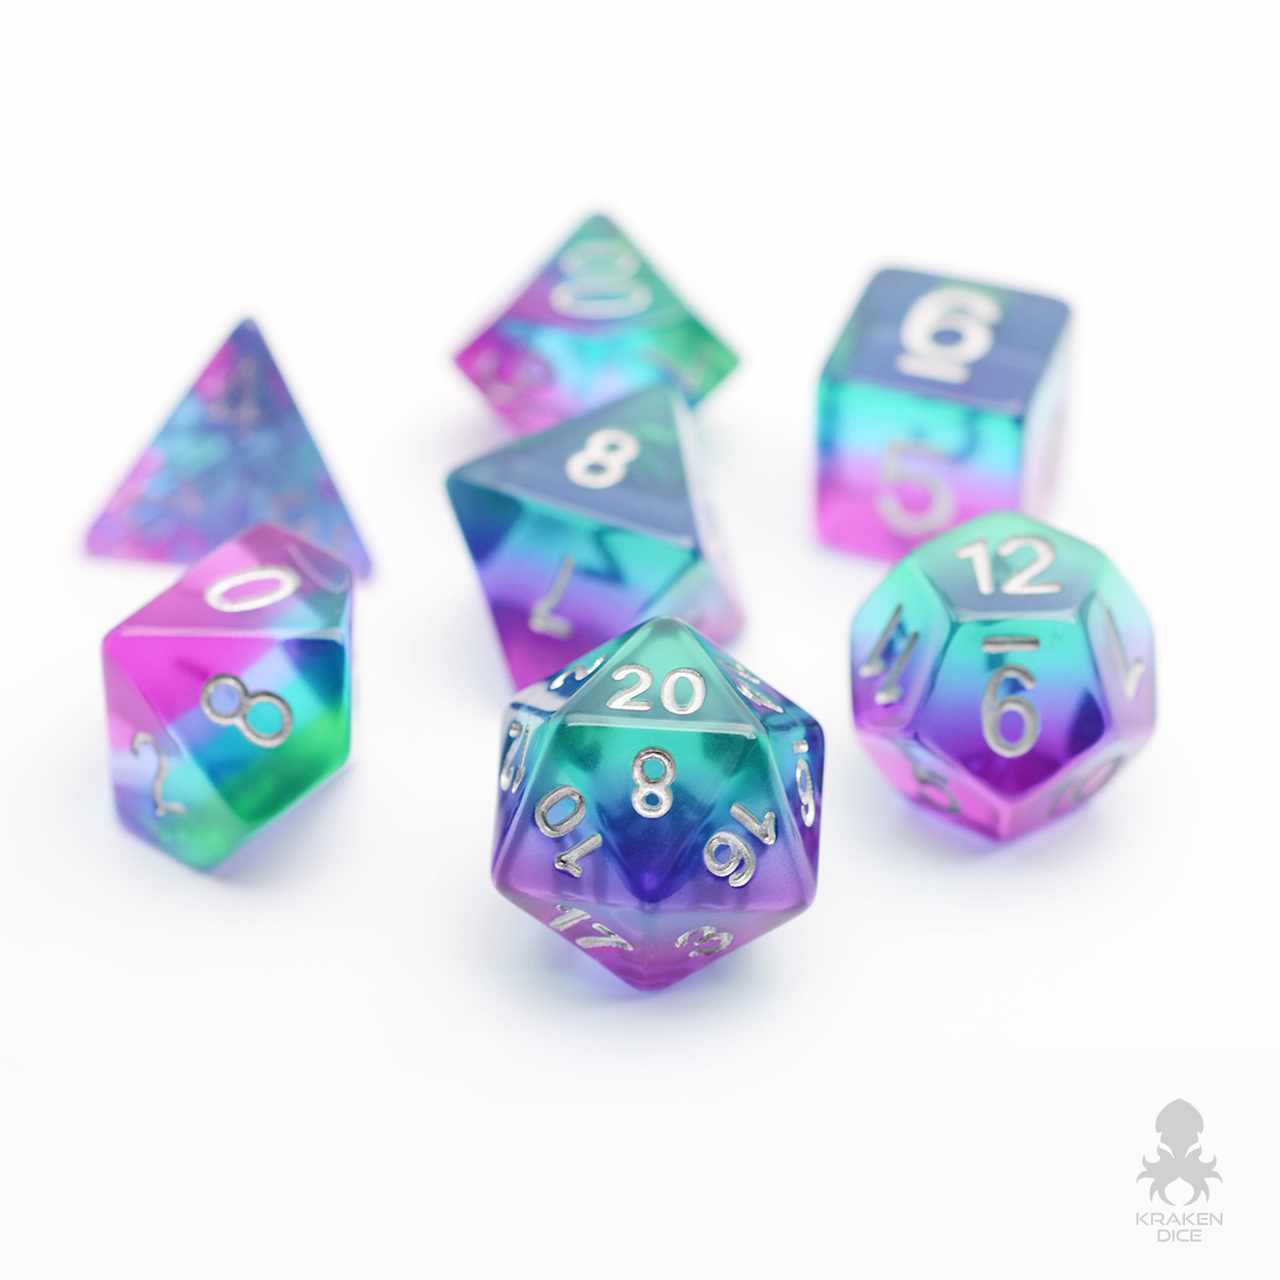 DND dice that are purple, blue and green and semi-transparent.